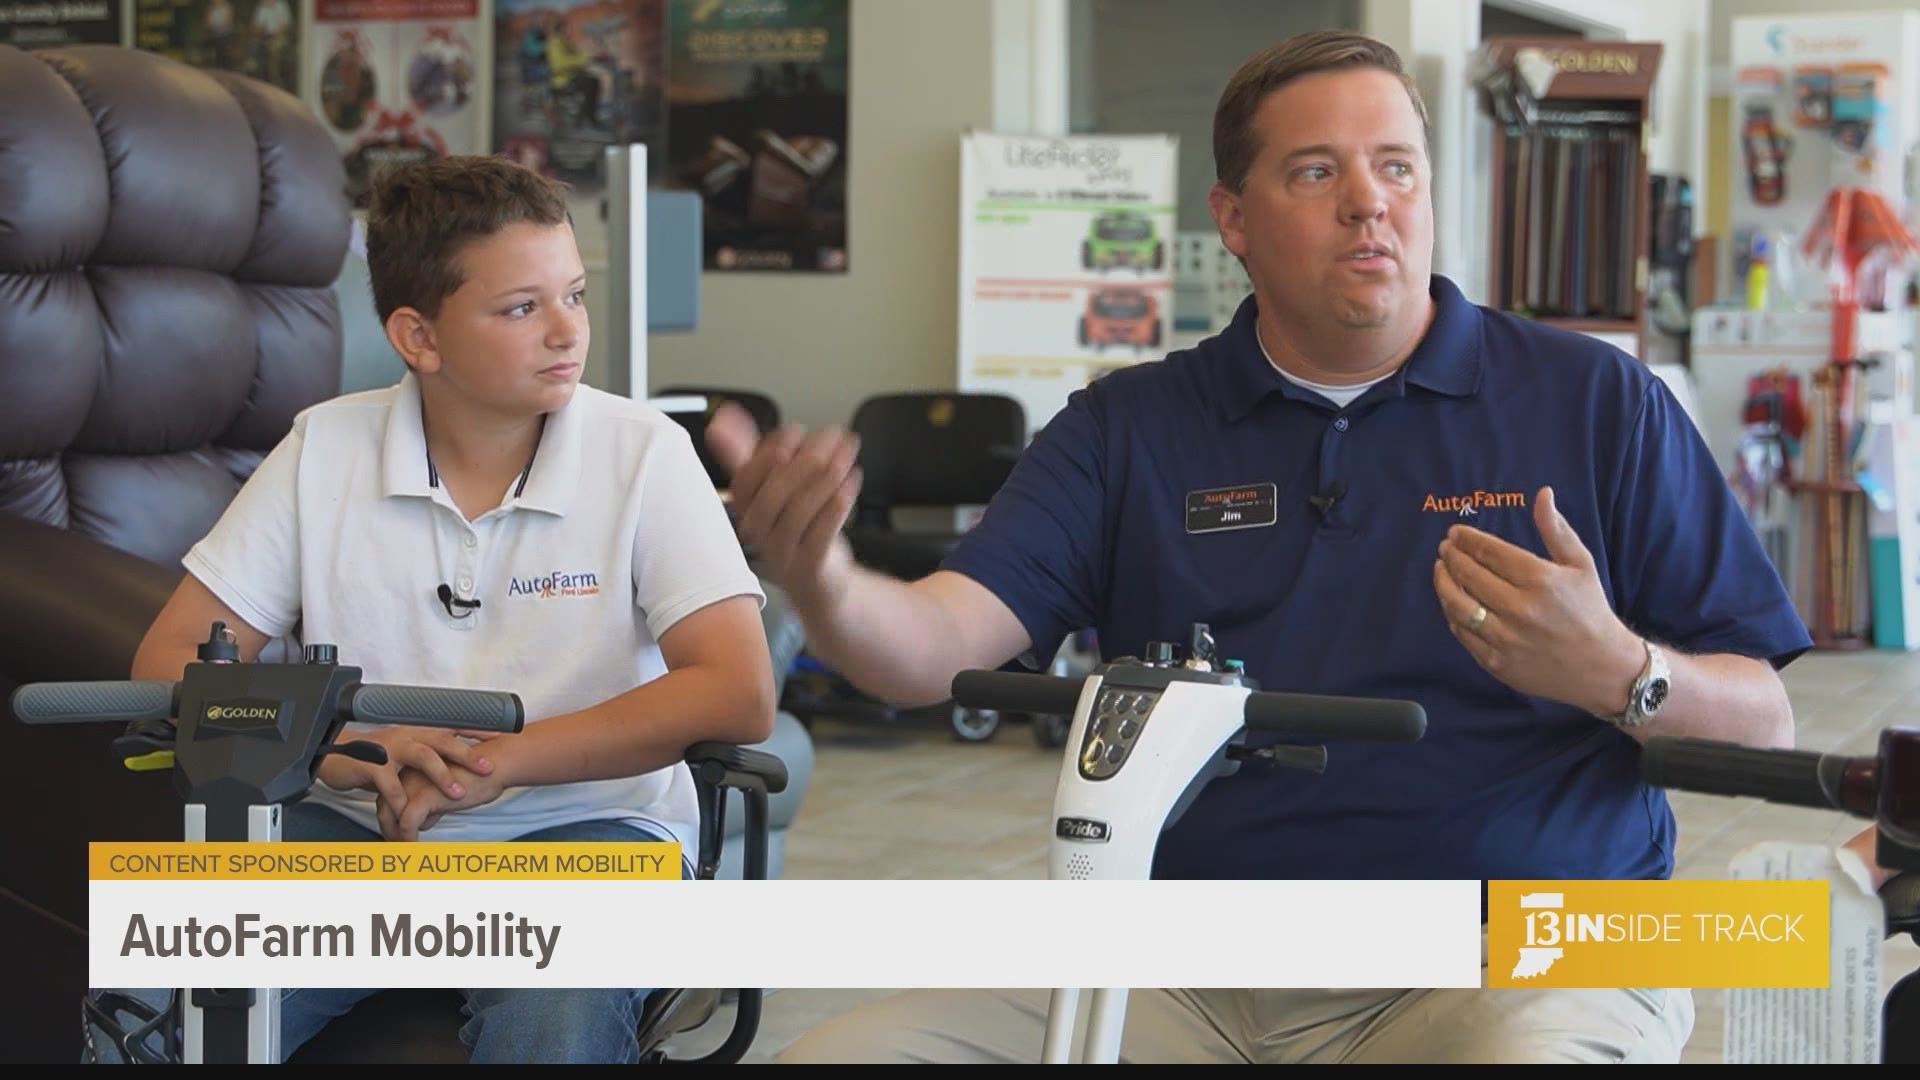 The mobility solutions at Auto Farm Mobility can simplify travel for summer trips.